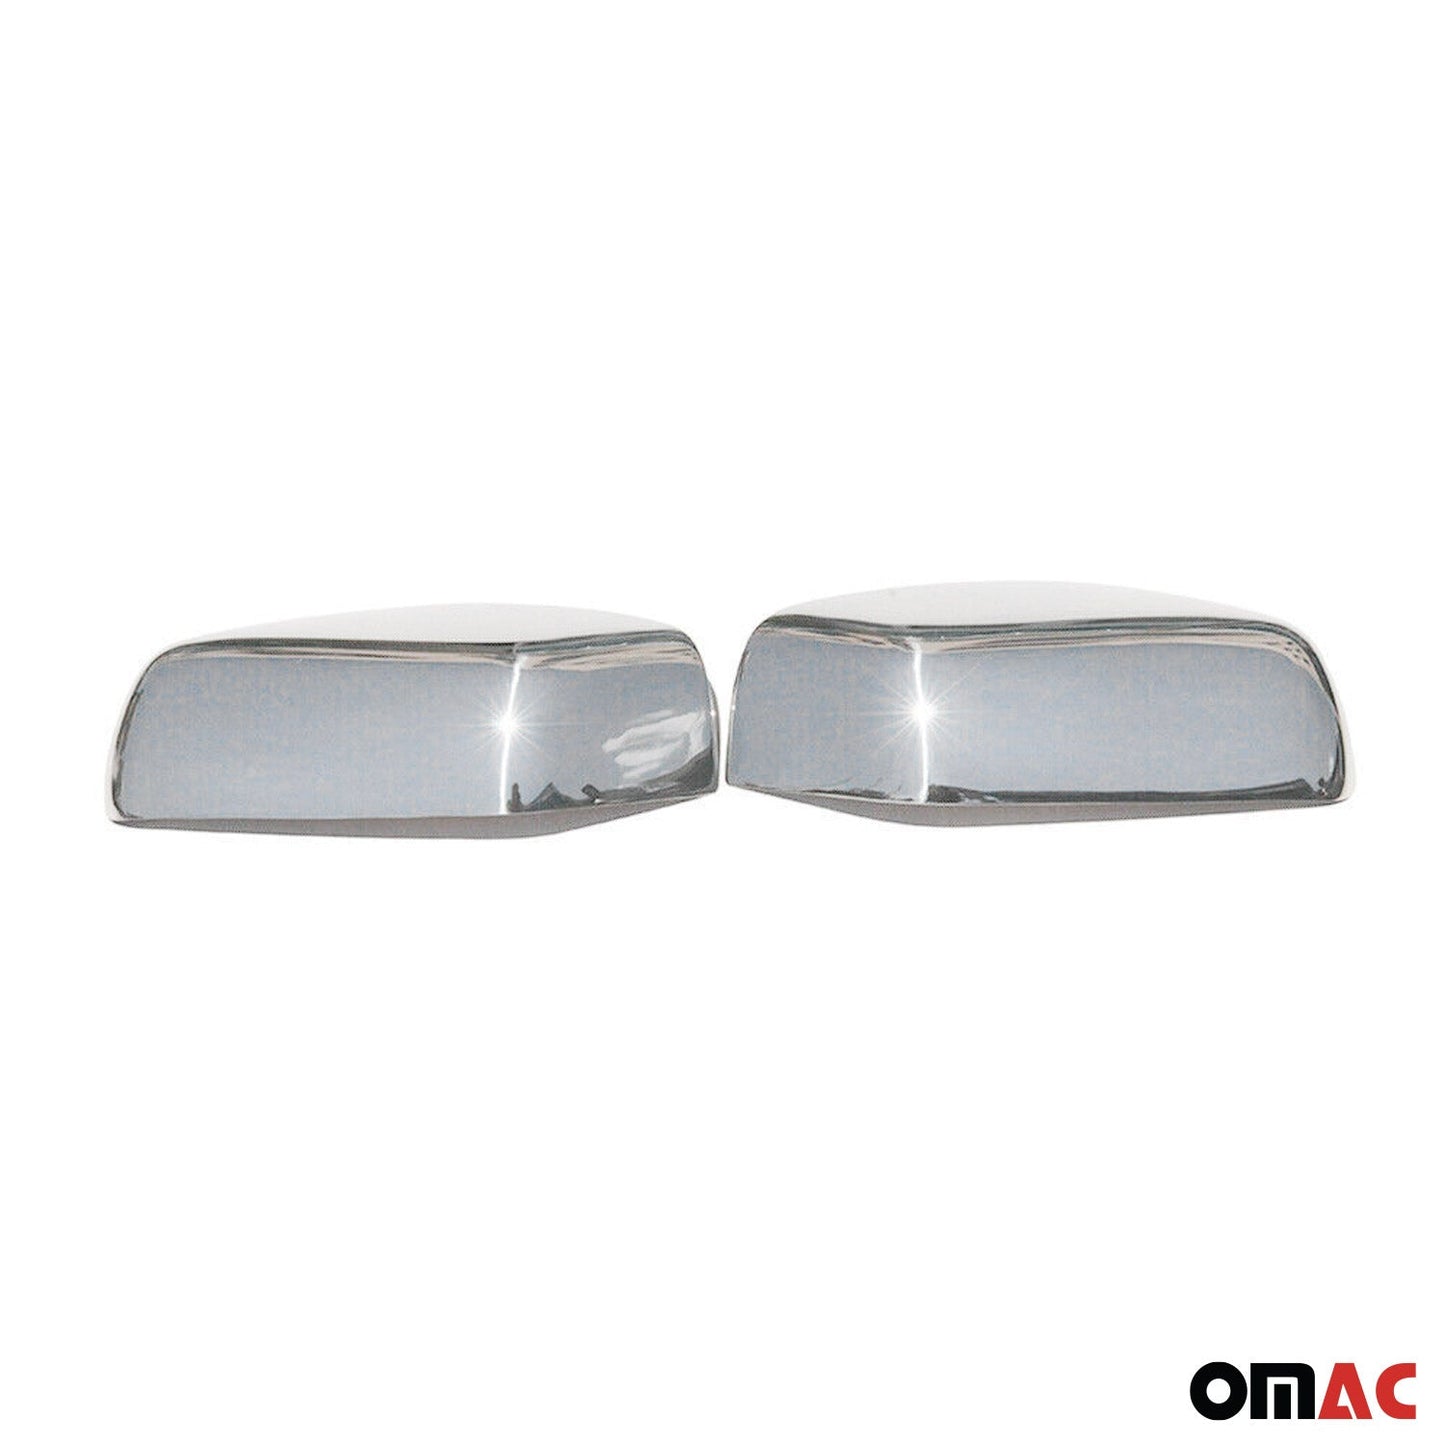 OMAC Side Mirror Cover Caps Fits Land Rover LR2 2008-2015 Steel Silver 2 Pcs U003434